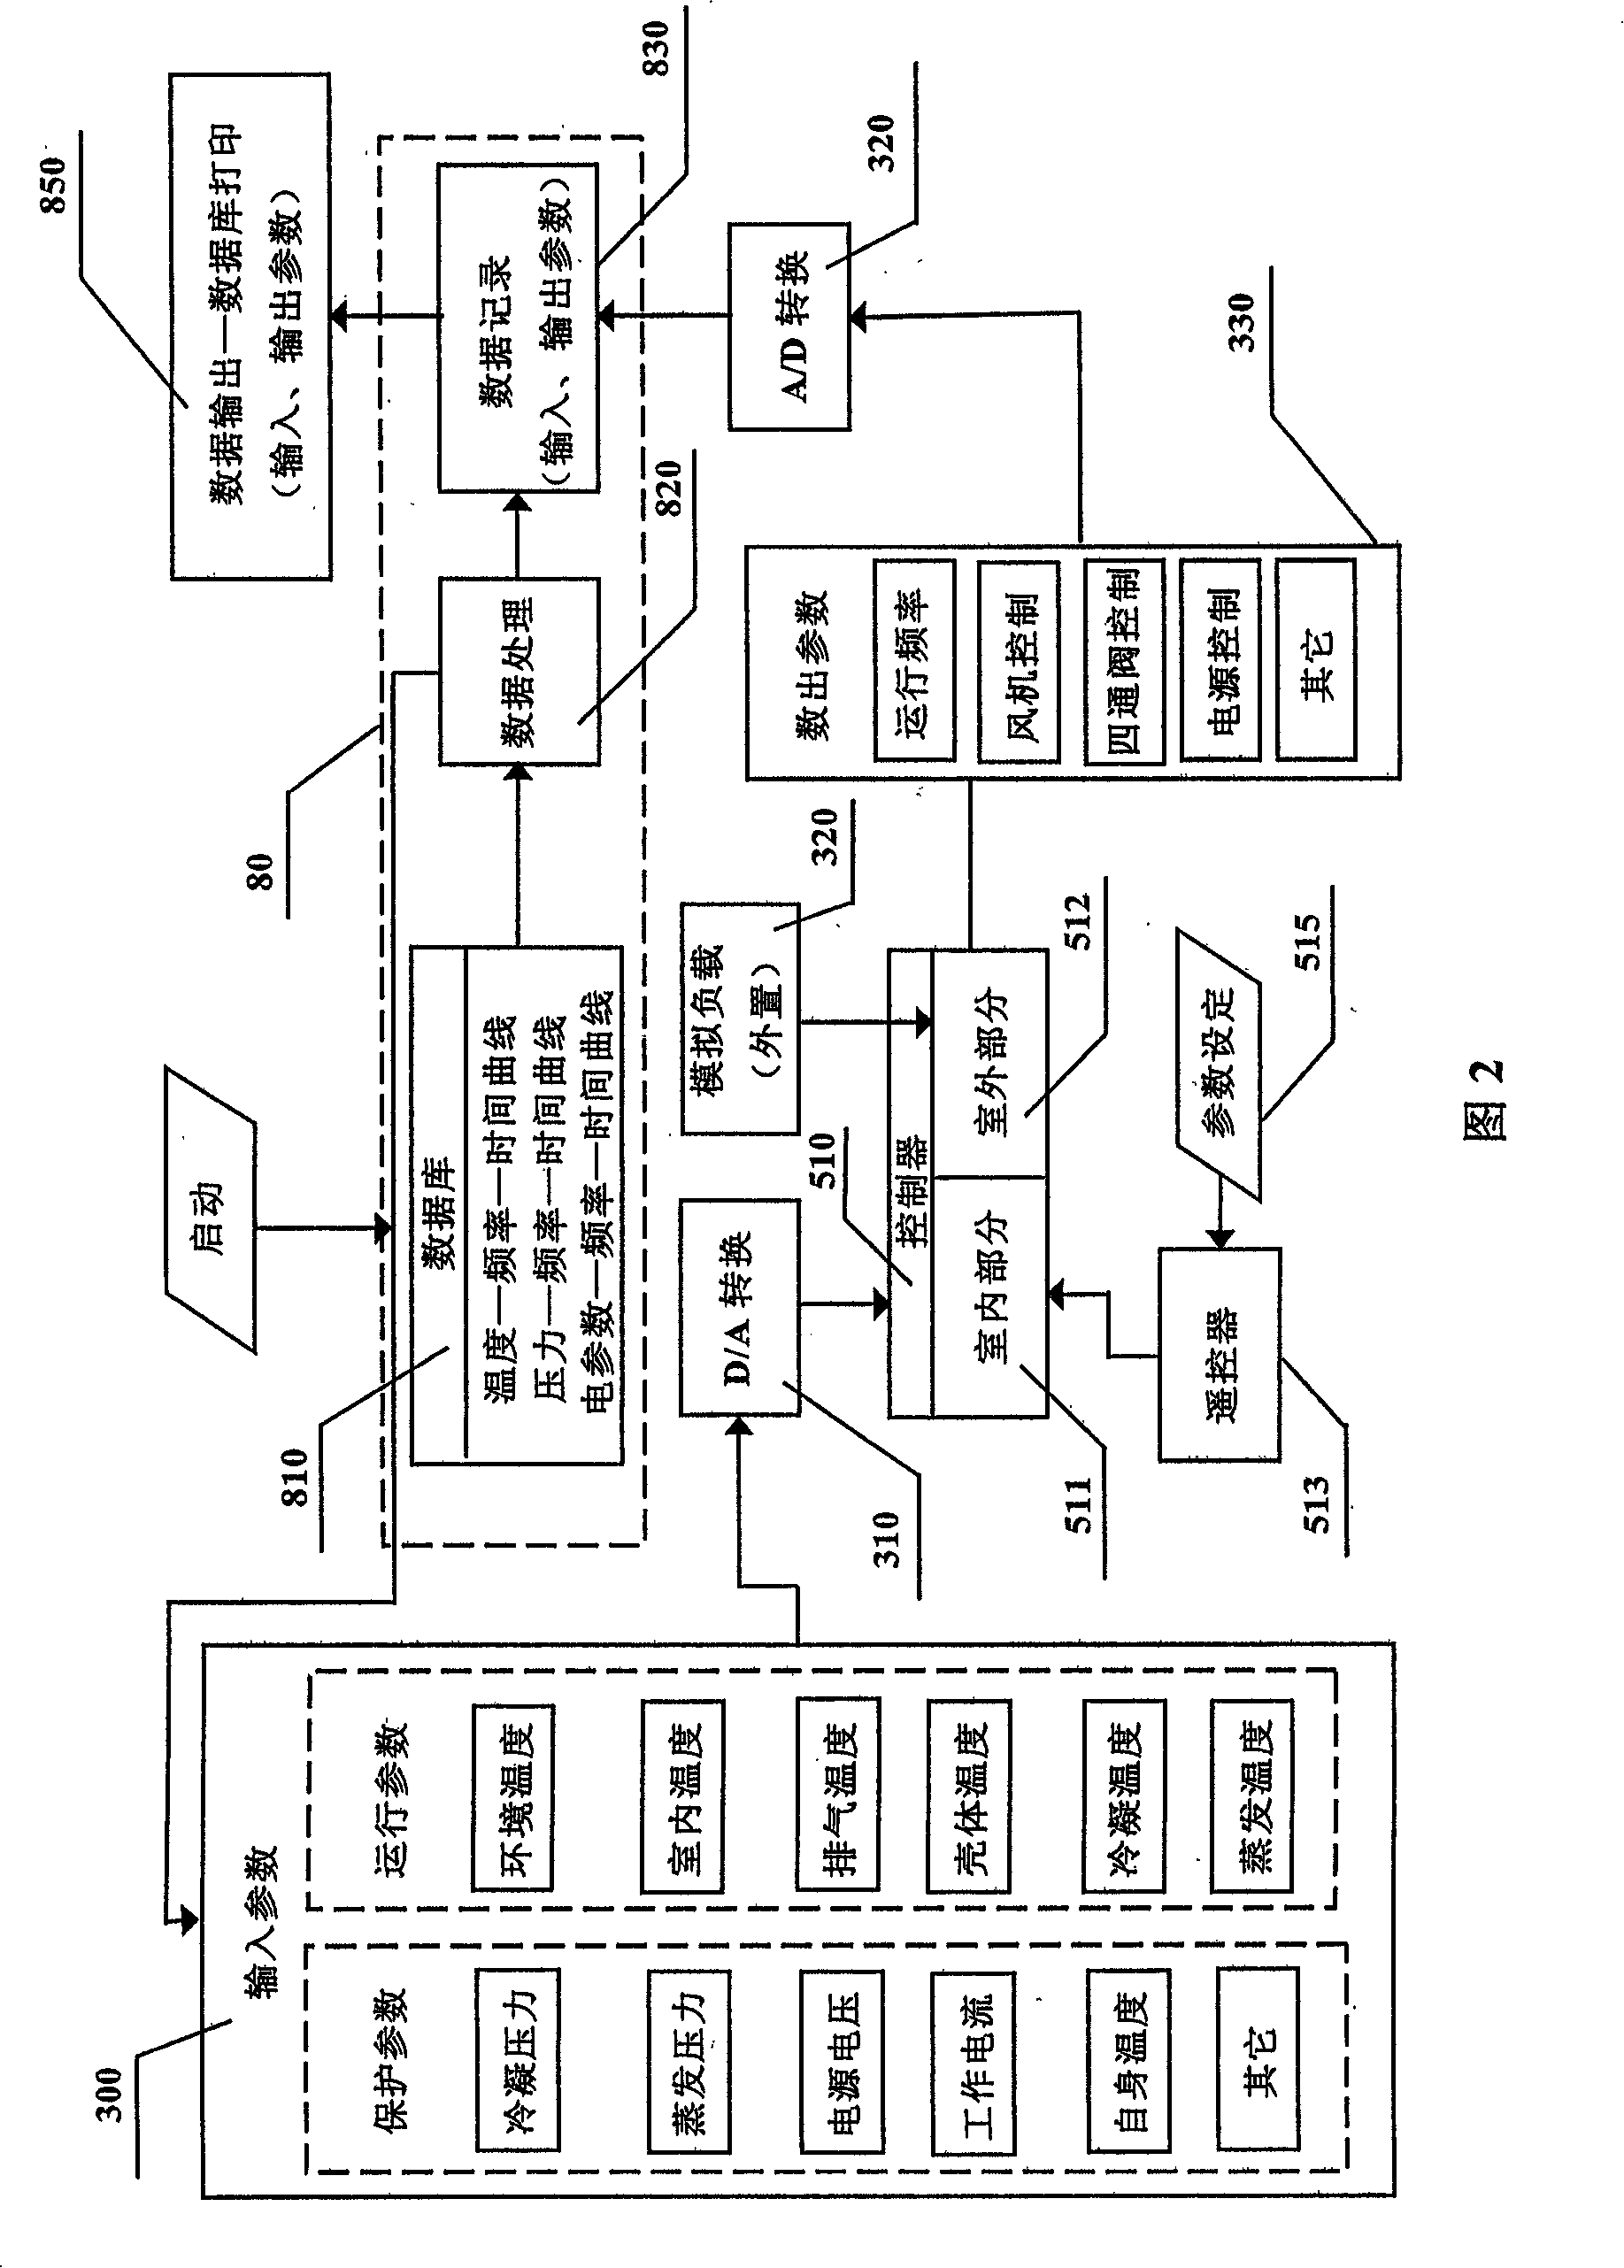 Intelligent detecting system and method for frequency conversion controller of air conditioner